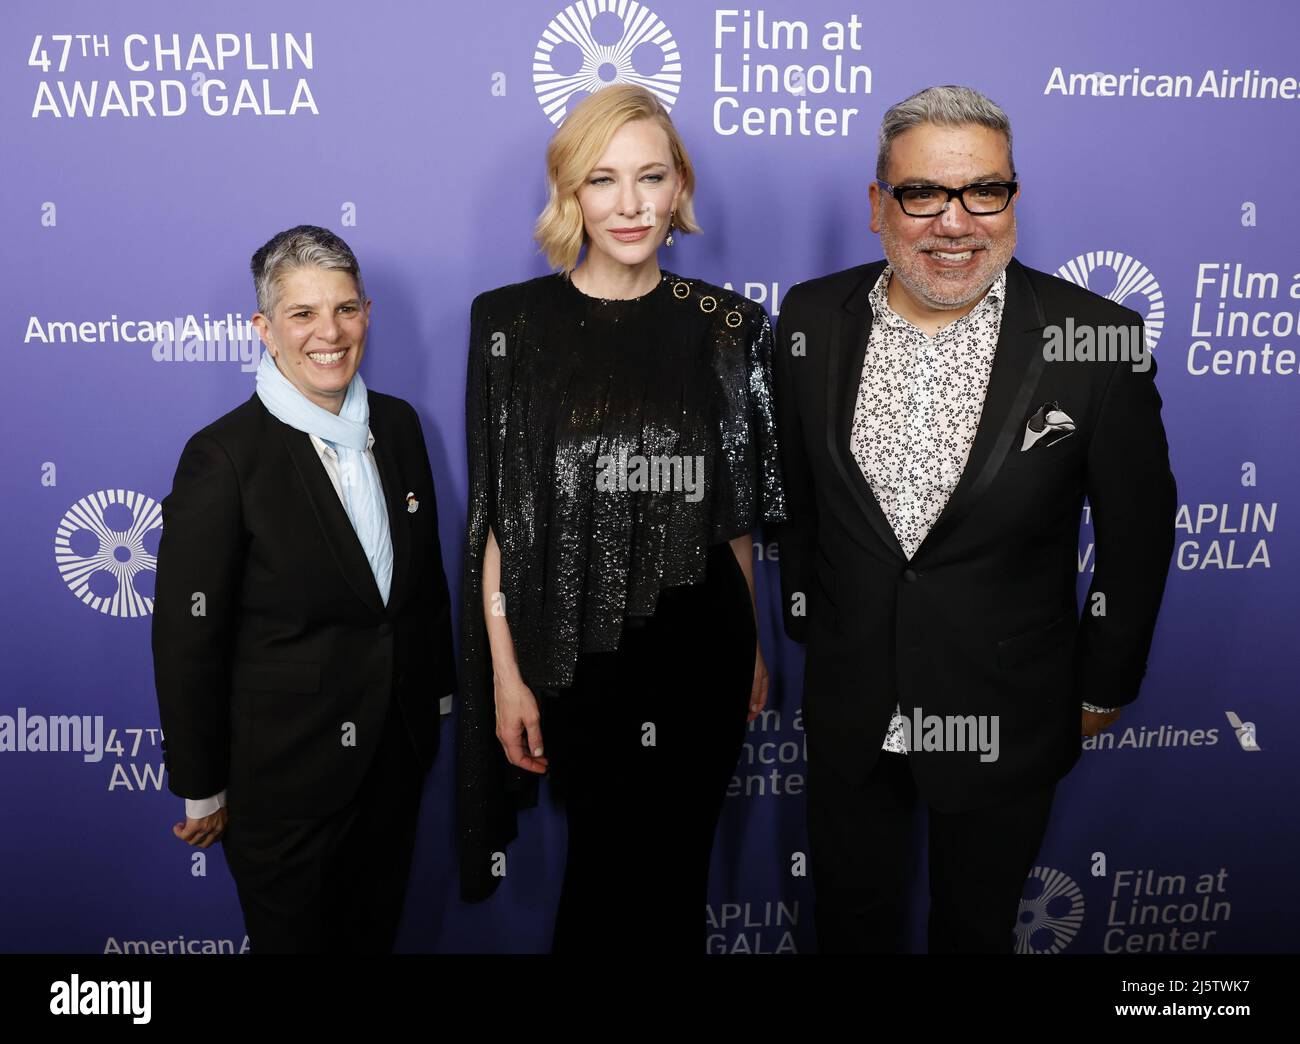 New York, United States. 25th Apr, 2022. FLC President Lesli Klainberg, Actress Cate Blanchett and Senior Vice President of FLC and Executive Director of the New York Film Festival Eugene Hernandez arrive on the red carpet at the 47th Chaplin Award Gala honoring Cate Blanchett at Alice Tully Hall, Lincoln Center in New York City on Monday, April 25, 2022. Photo by John Angelillo/UPI Credit: UPI/Alamy Live News Stock Photo